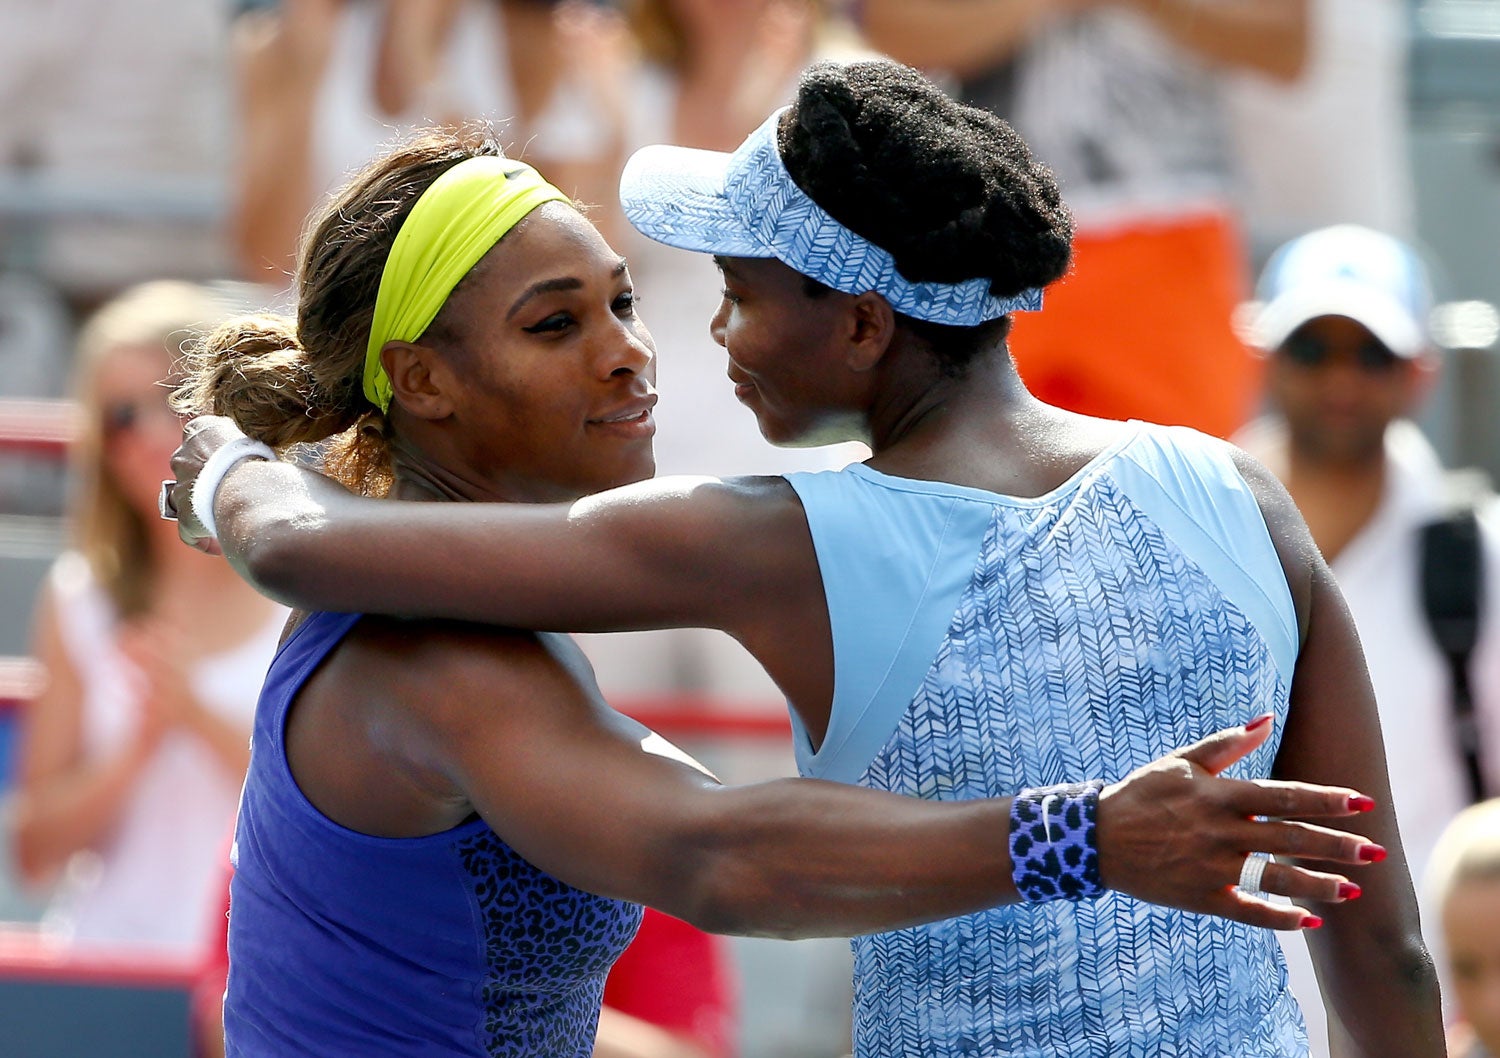 Venus Beats Serena For the First Time Since 2009